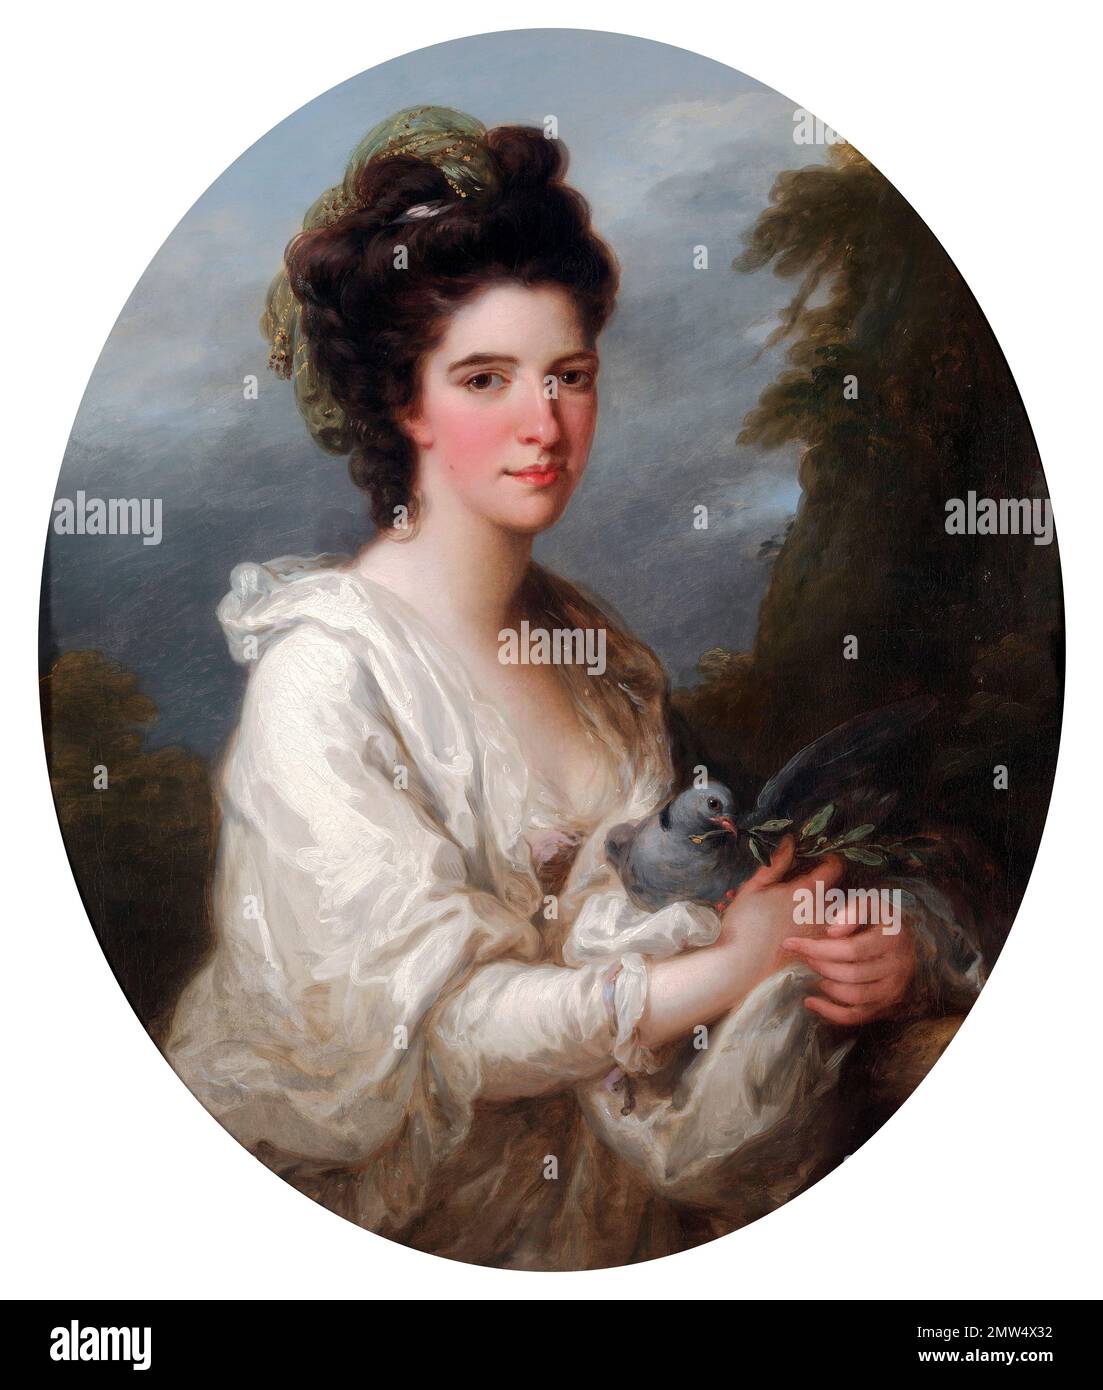 Angelica Kauffman. Portrait of Isabella Hunter by the Swiss painter, Angelica Kauffmann (1741-1807), oil on canvas, c. 1776-90 Stock Photo